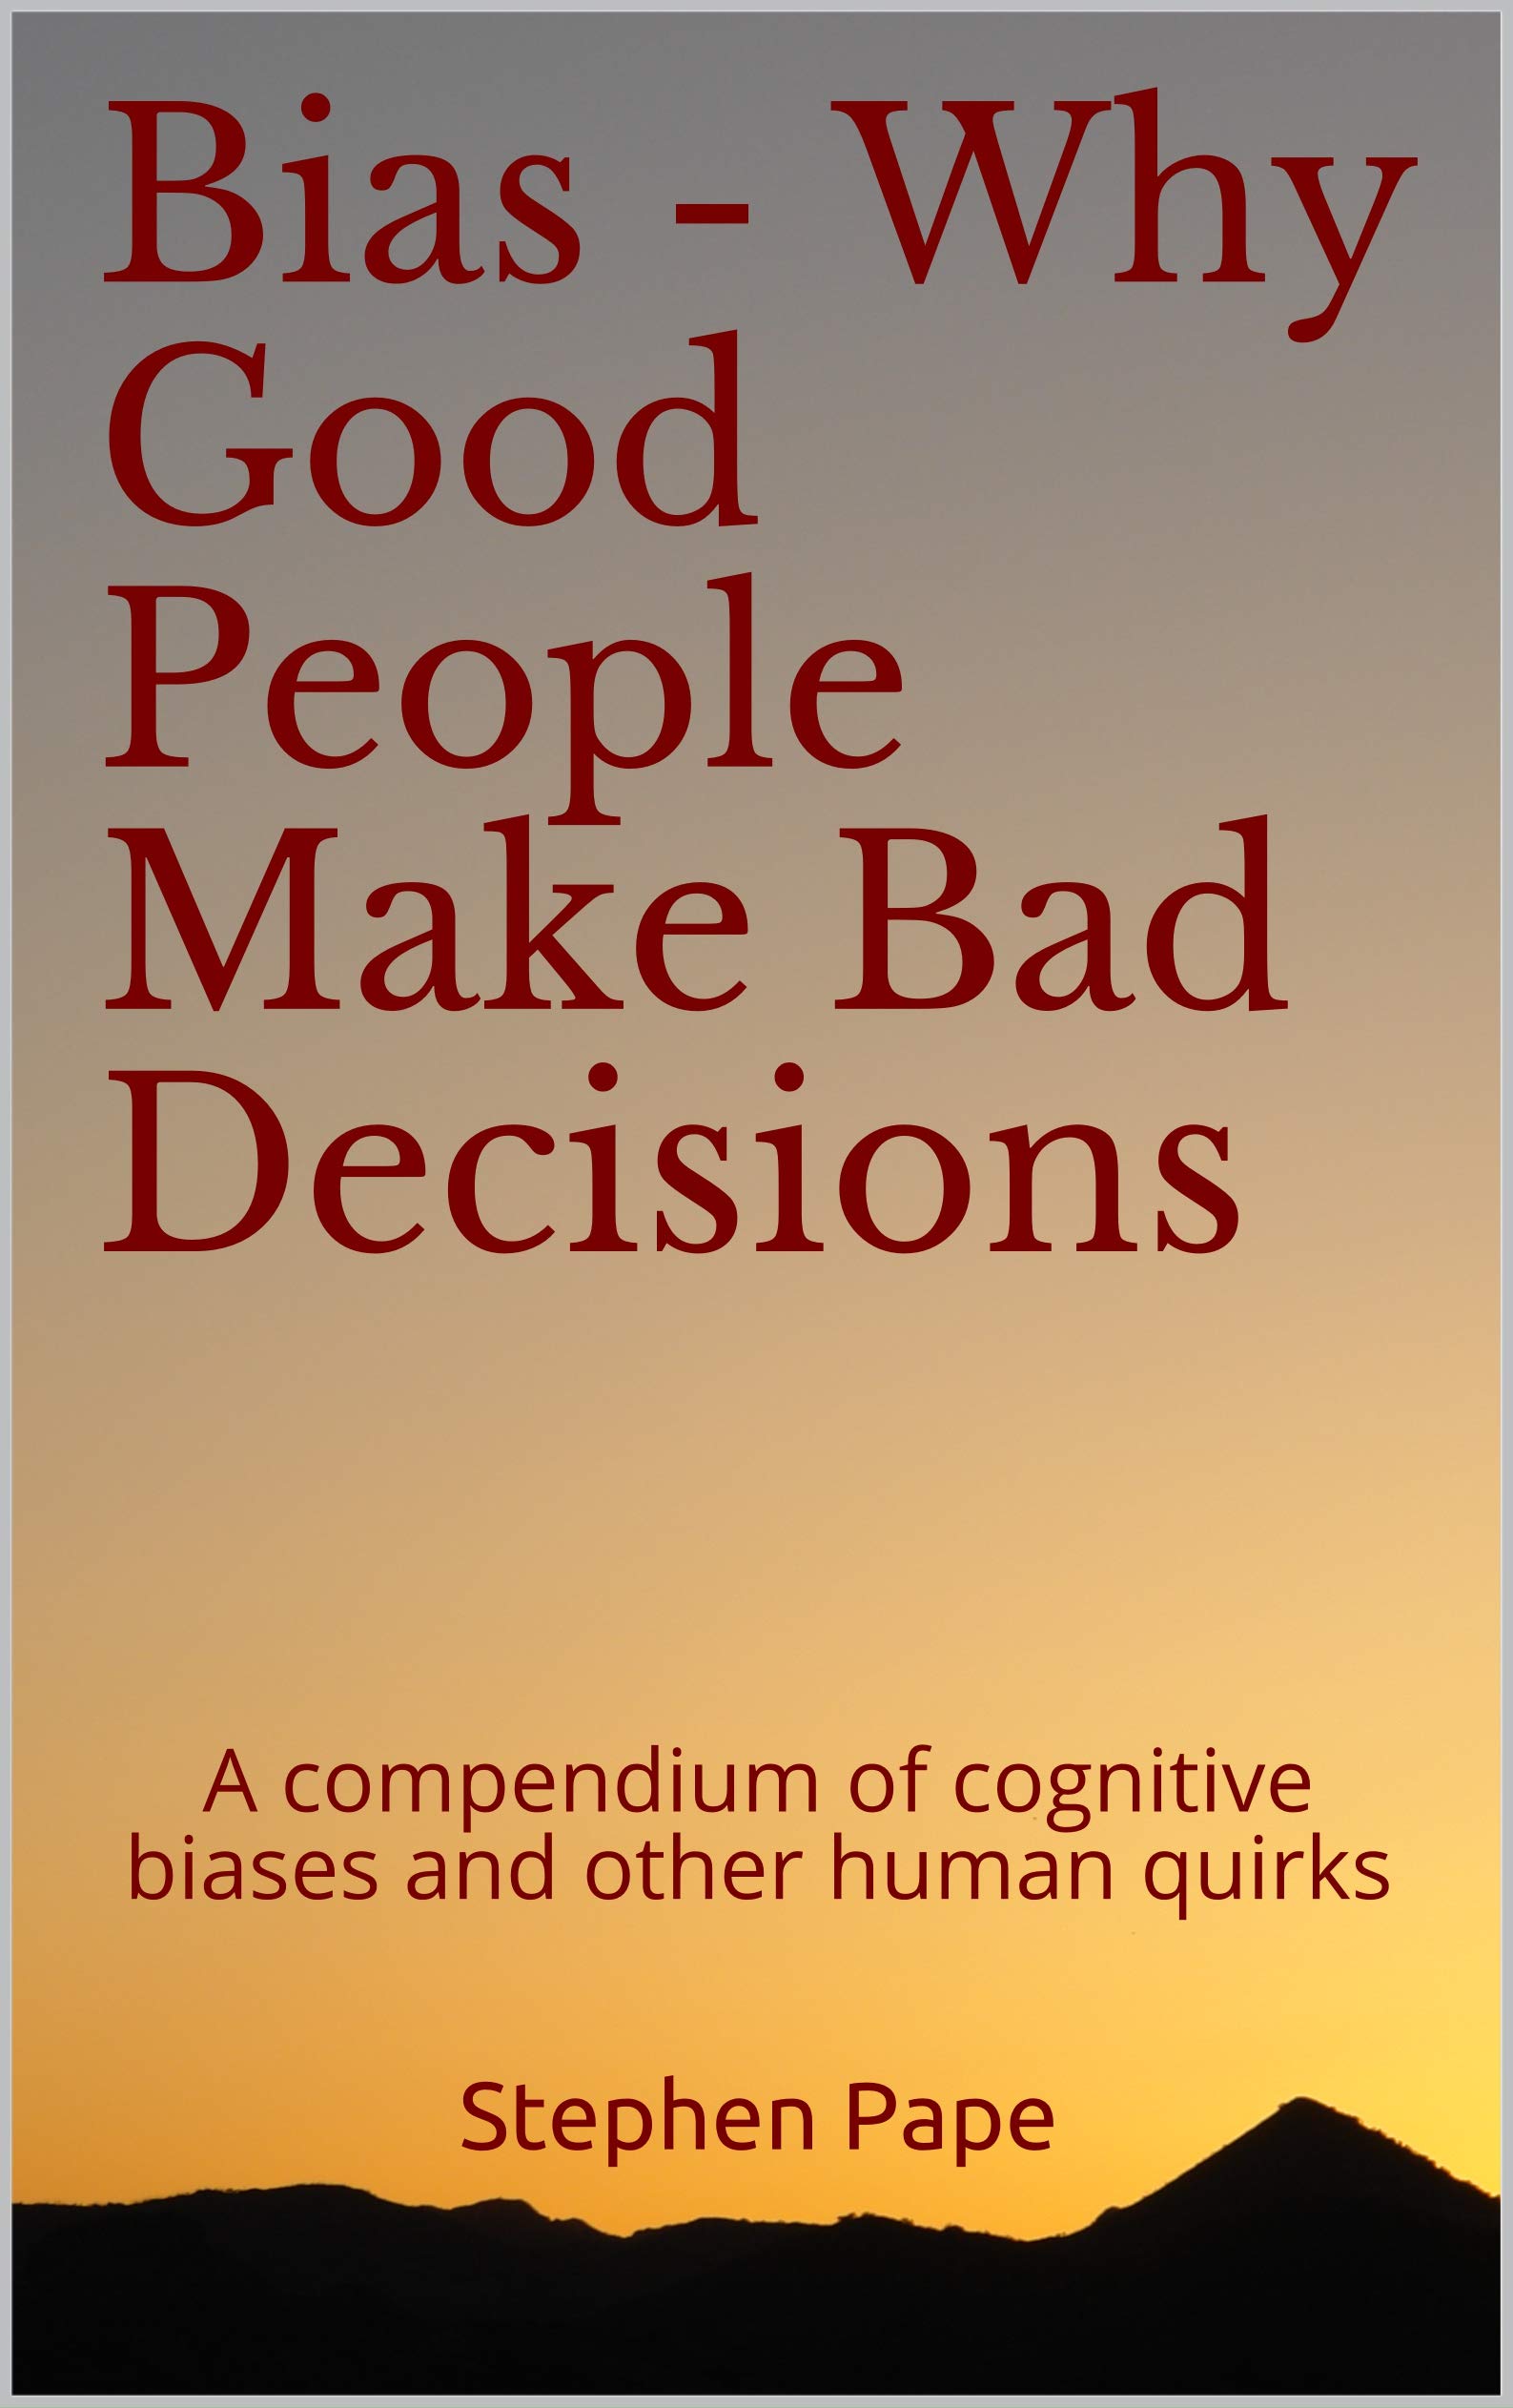 Book Cover - Bias: Why Good People Make Bad Decisions by Stephen Pape.